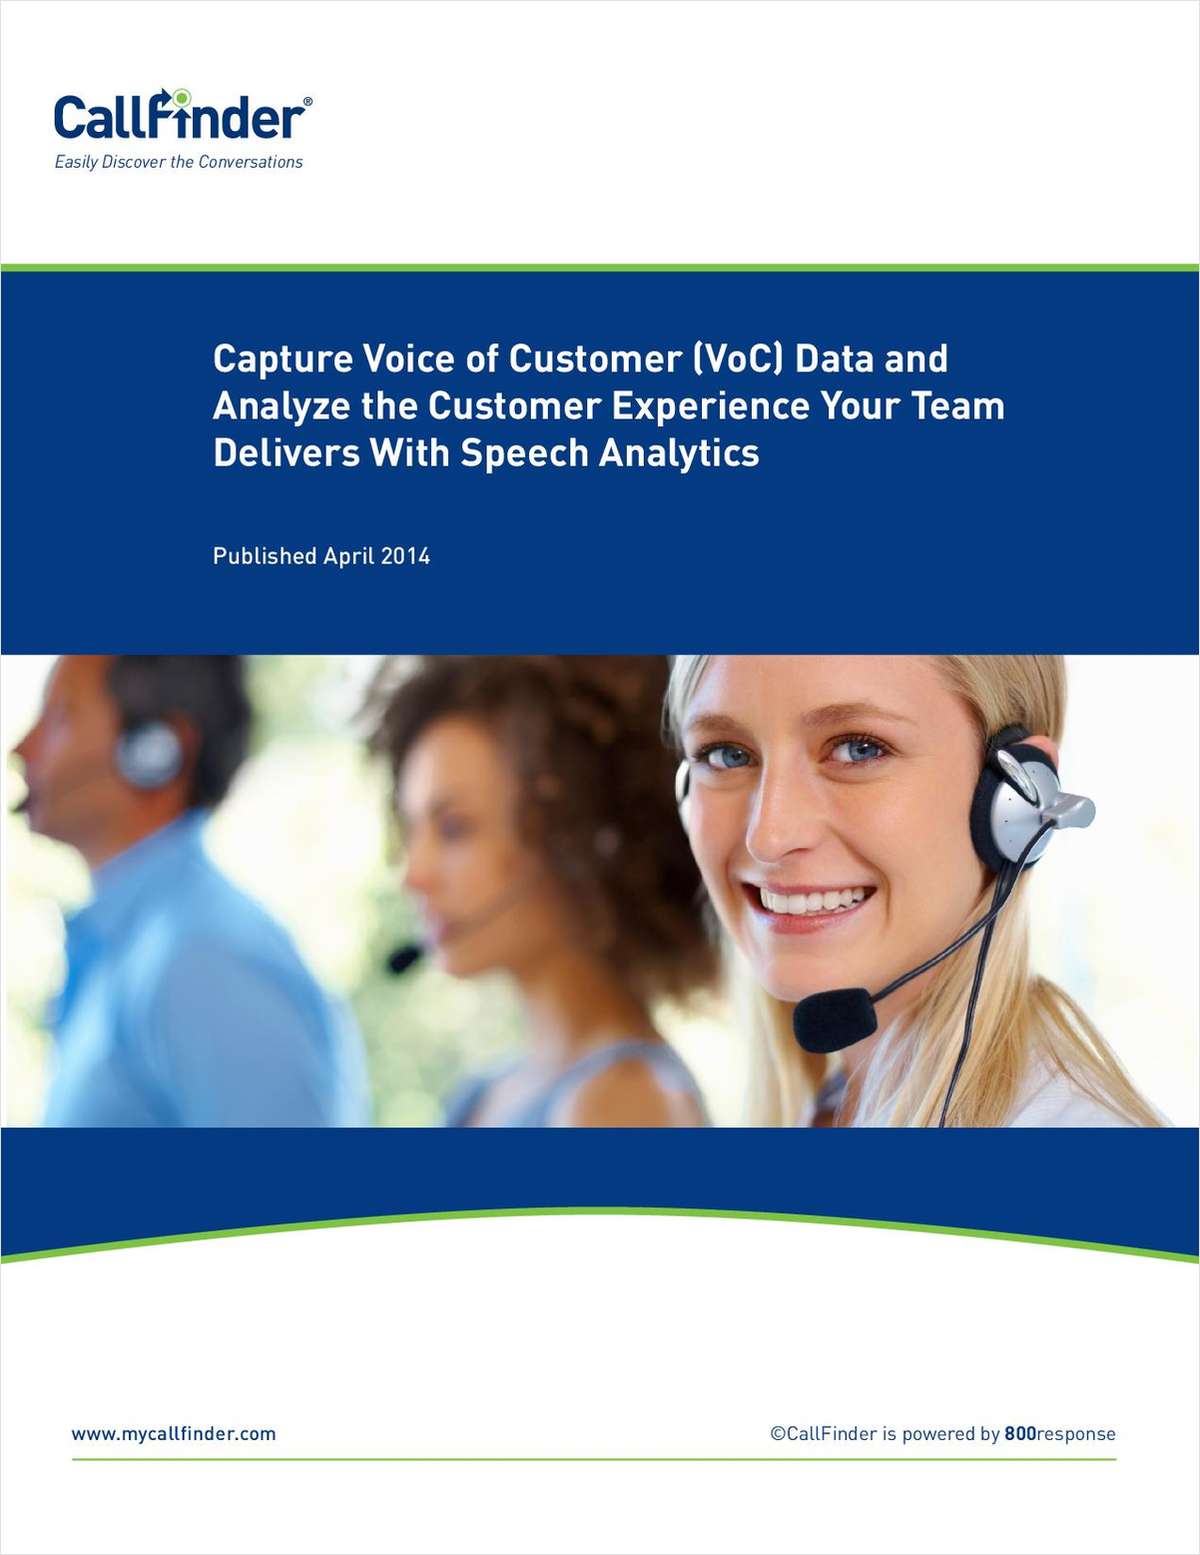 Essential Steps to Capture and Analyze the Customer Experience